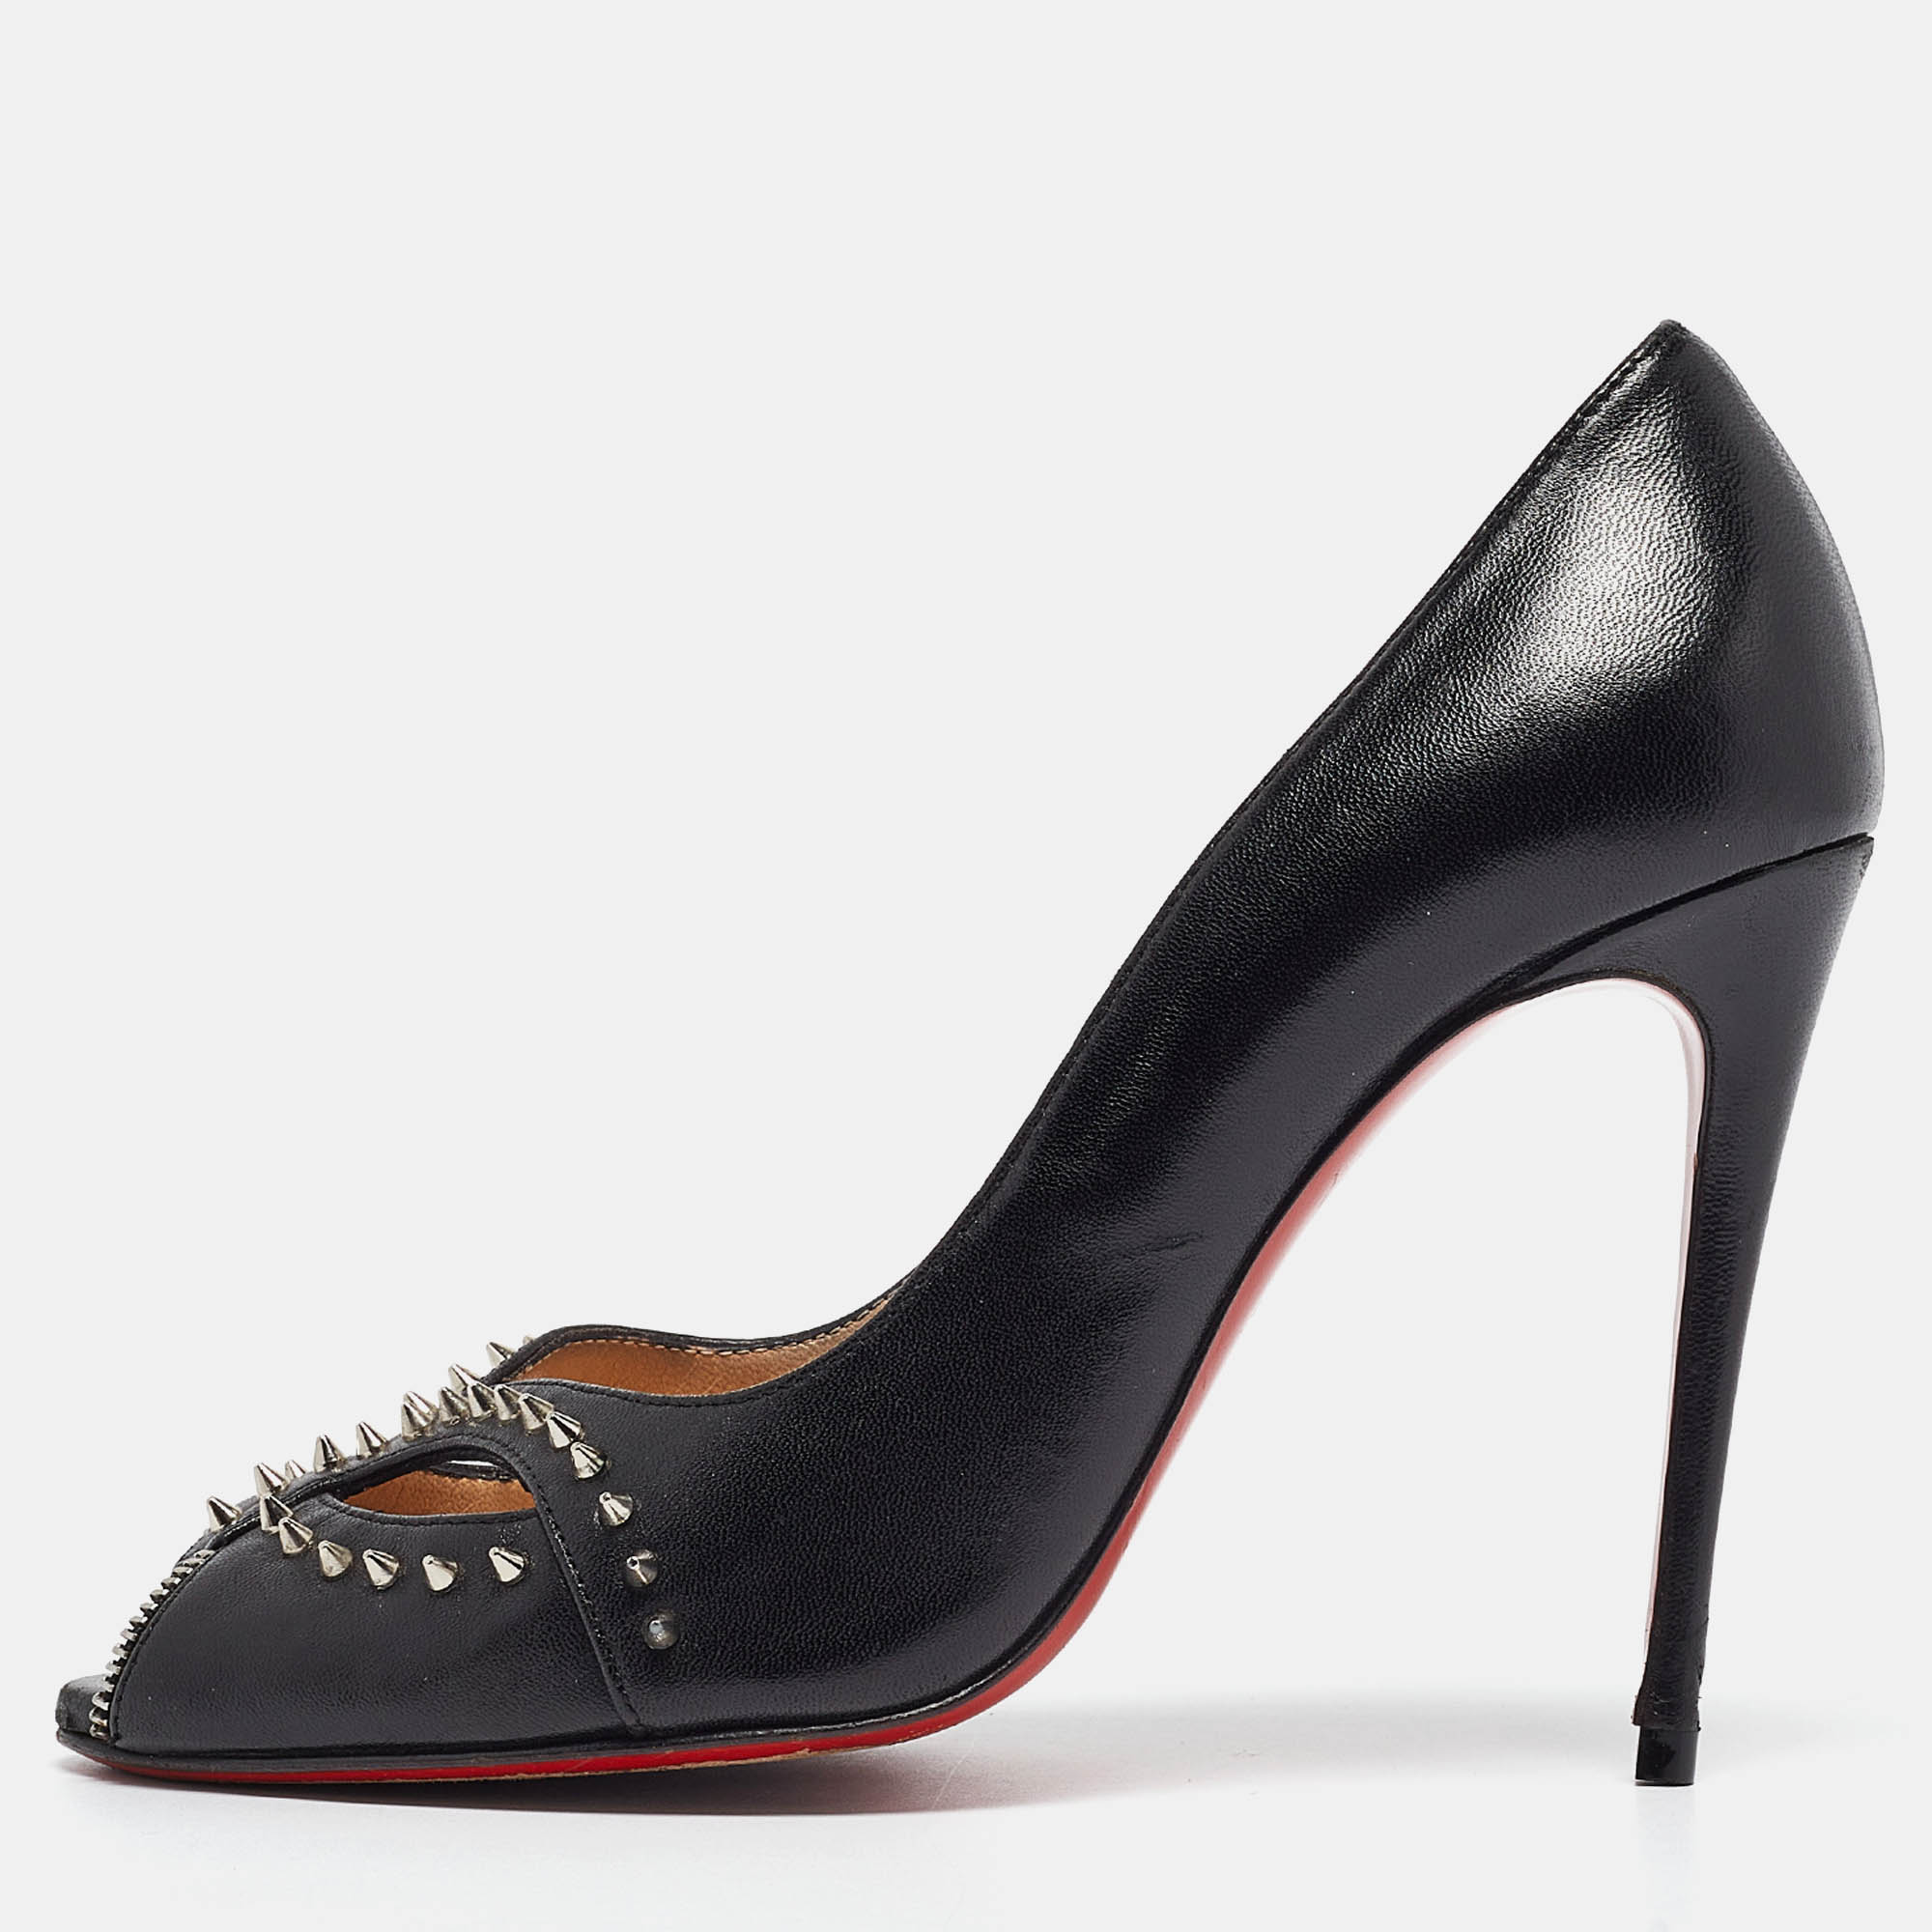 Christian louboutin black leather cagouletta spike cut out peep toe pumps size 37